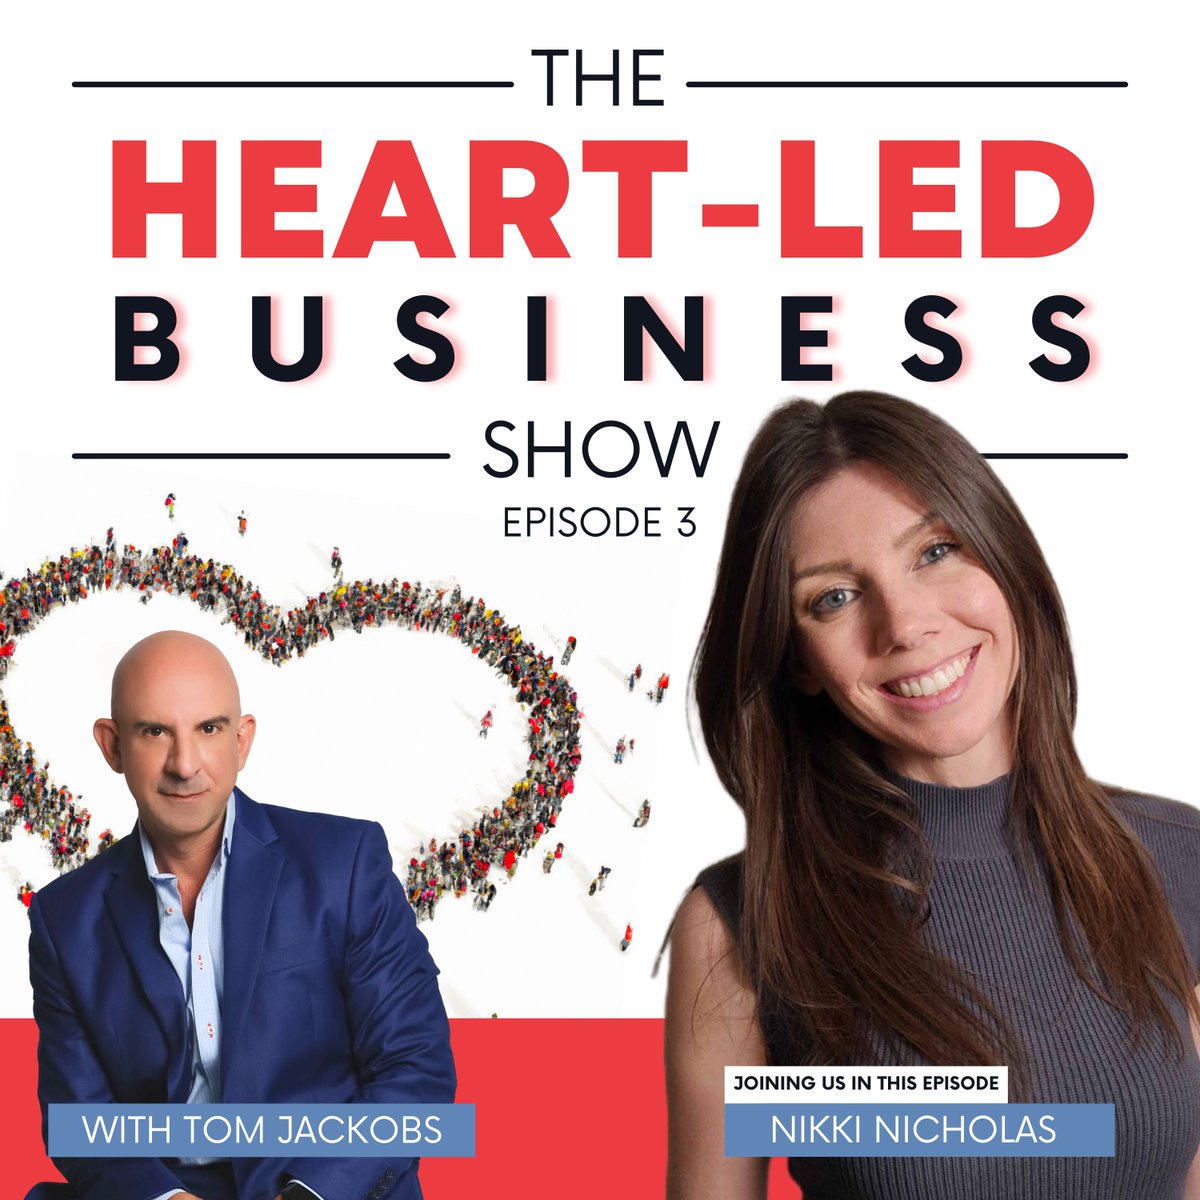 Dive deep into the essence of success reimagined! Join Nikki Nicholas on the Heart Led Business Show as we venture into the realms of conscious capitalism and compassionate leadership. #HeartLedBusiness #ConsciousCapitalism